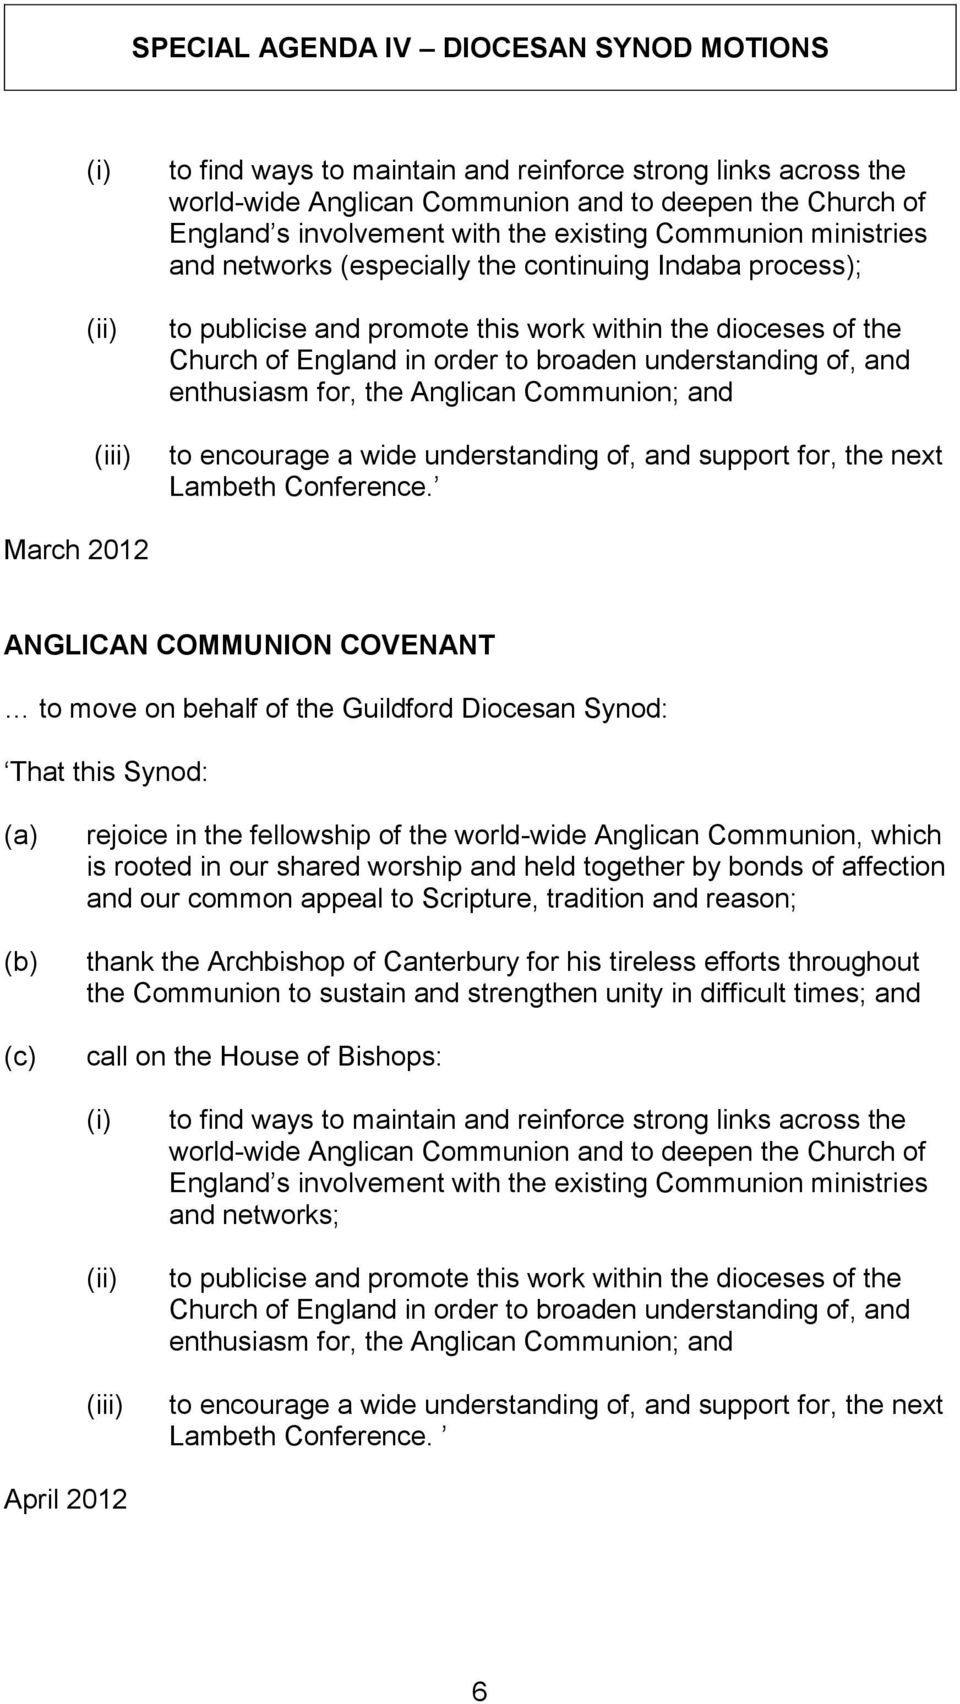 understanding of, and enthusiasm for, the Anglican Communion; and to encourage a wide understanding of, and support for, the next Lambeth Conference.